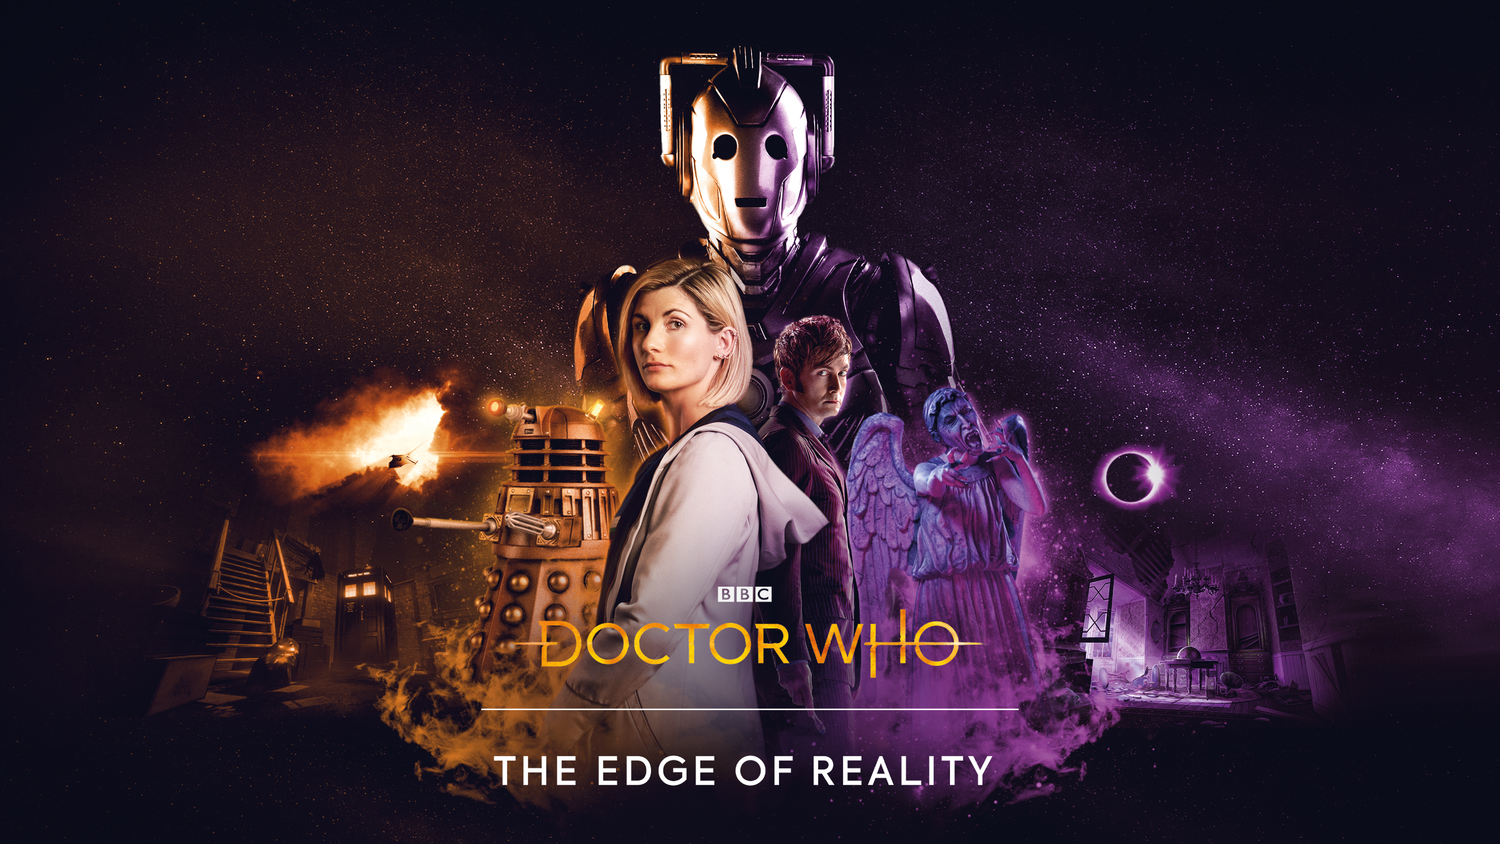 Doctor Who Console/PC game ‘The Edge of Reality’ announced – Indie Mac User